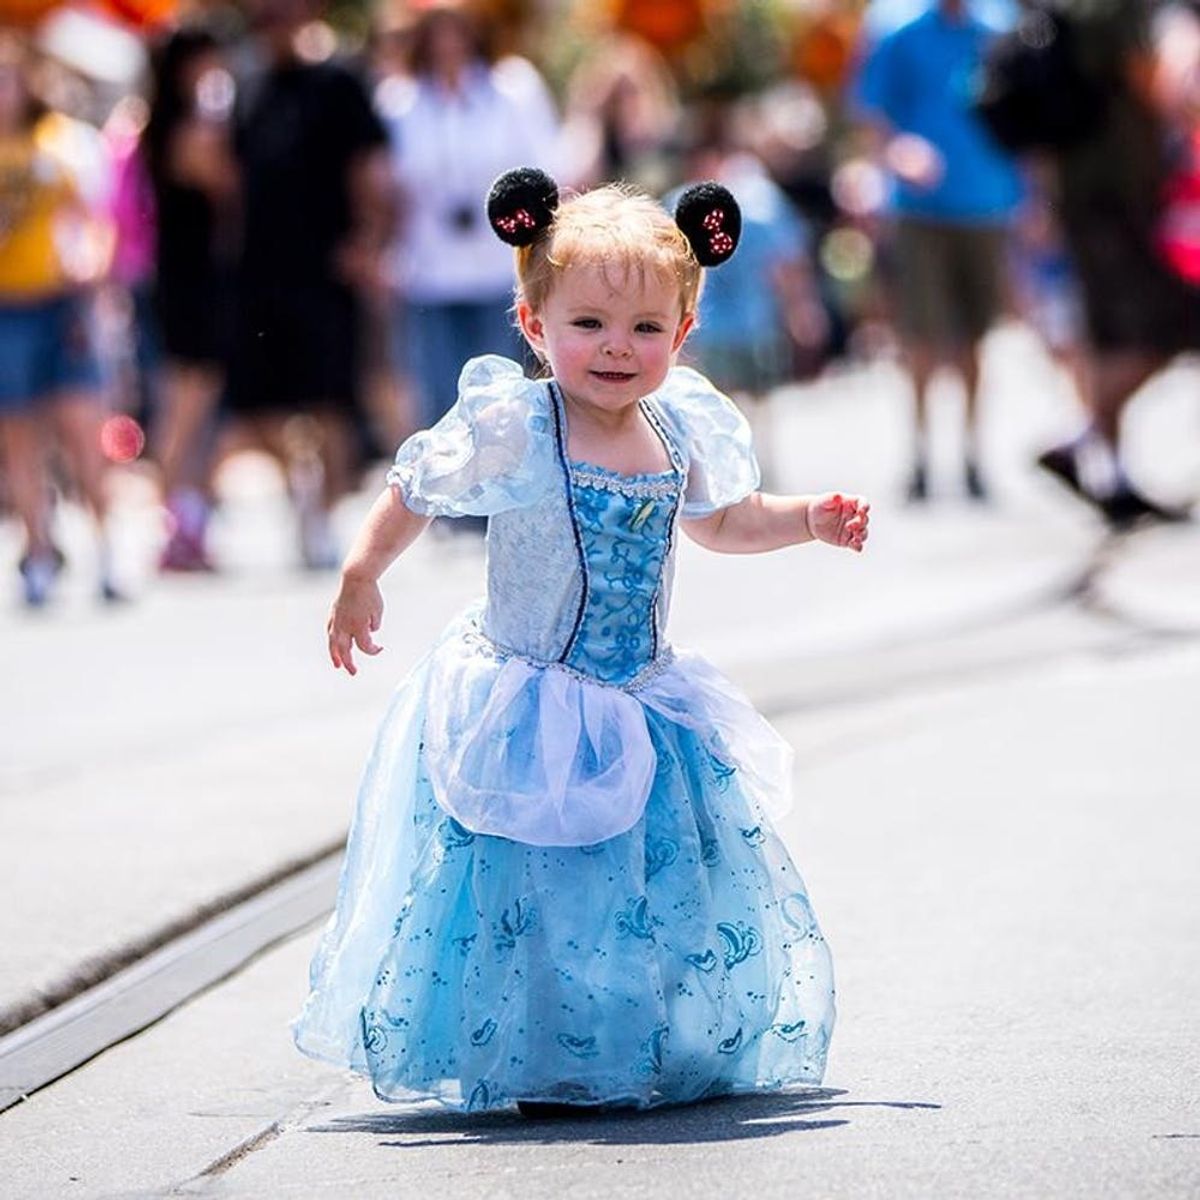 Science Says Disney Princesses Could Be Bad for Girls But Good for Boys